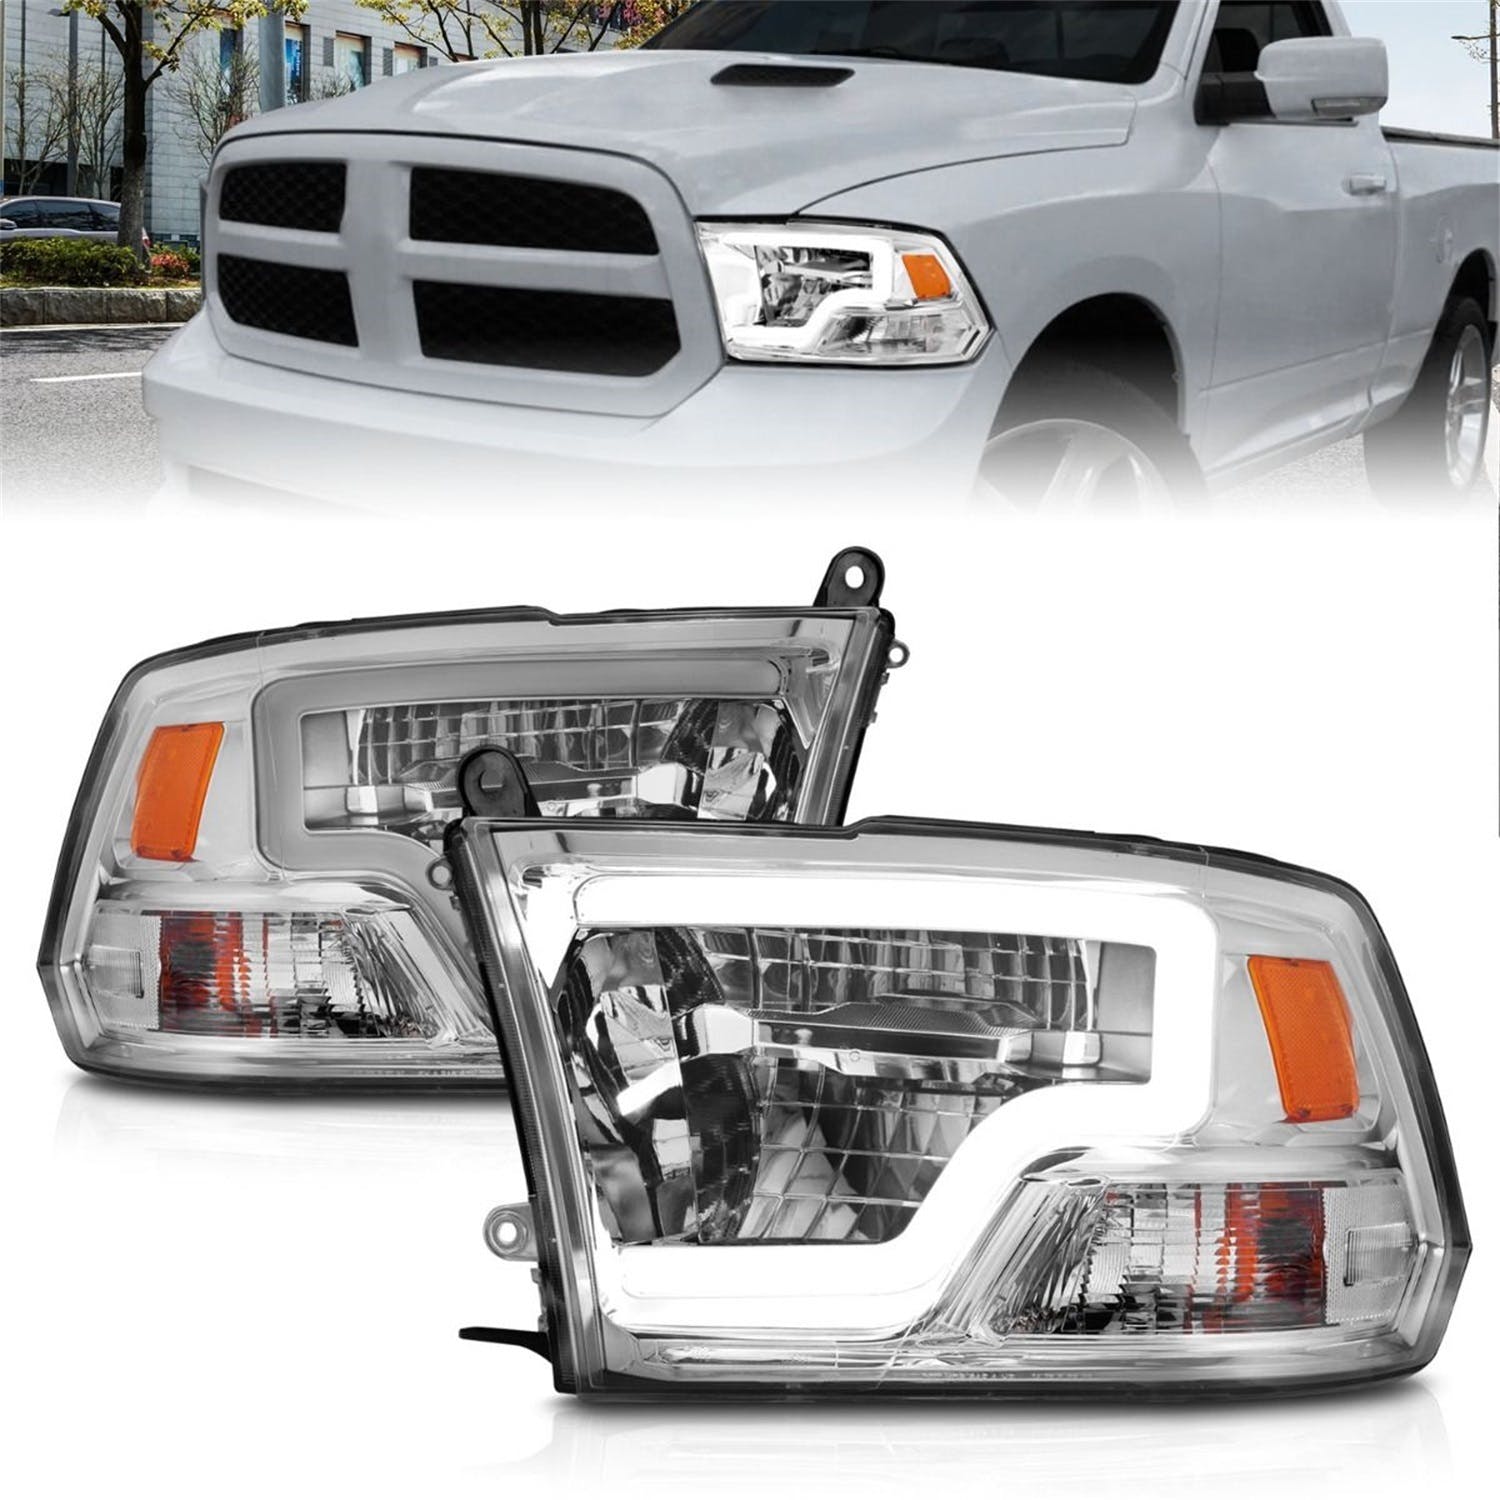 AnzoUSA 111540 Full LED Square Projector Headlights with Light Bar Chrome Housing